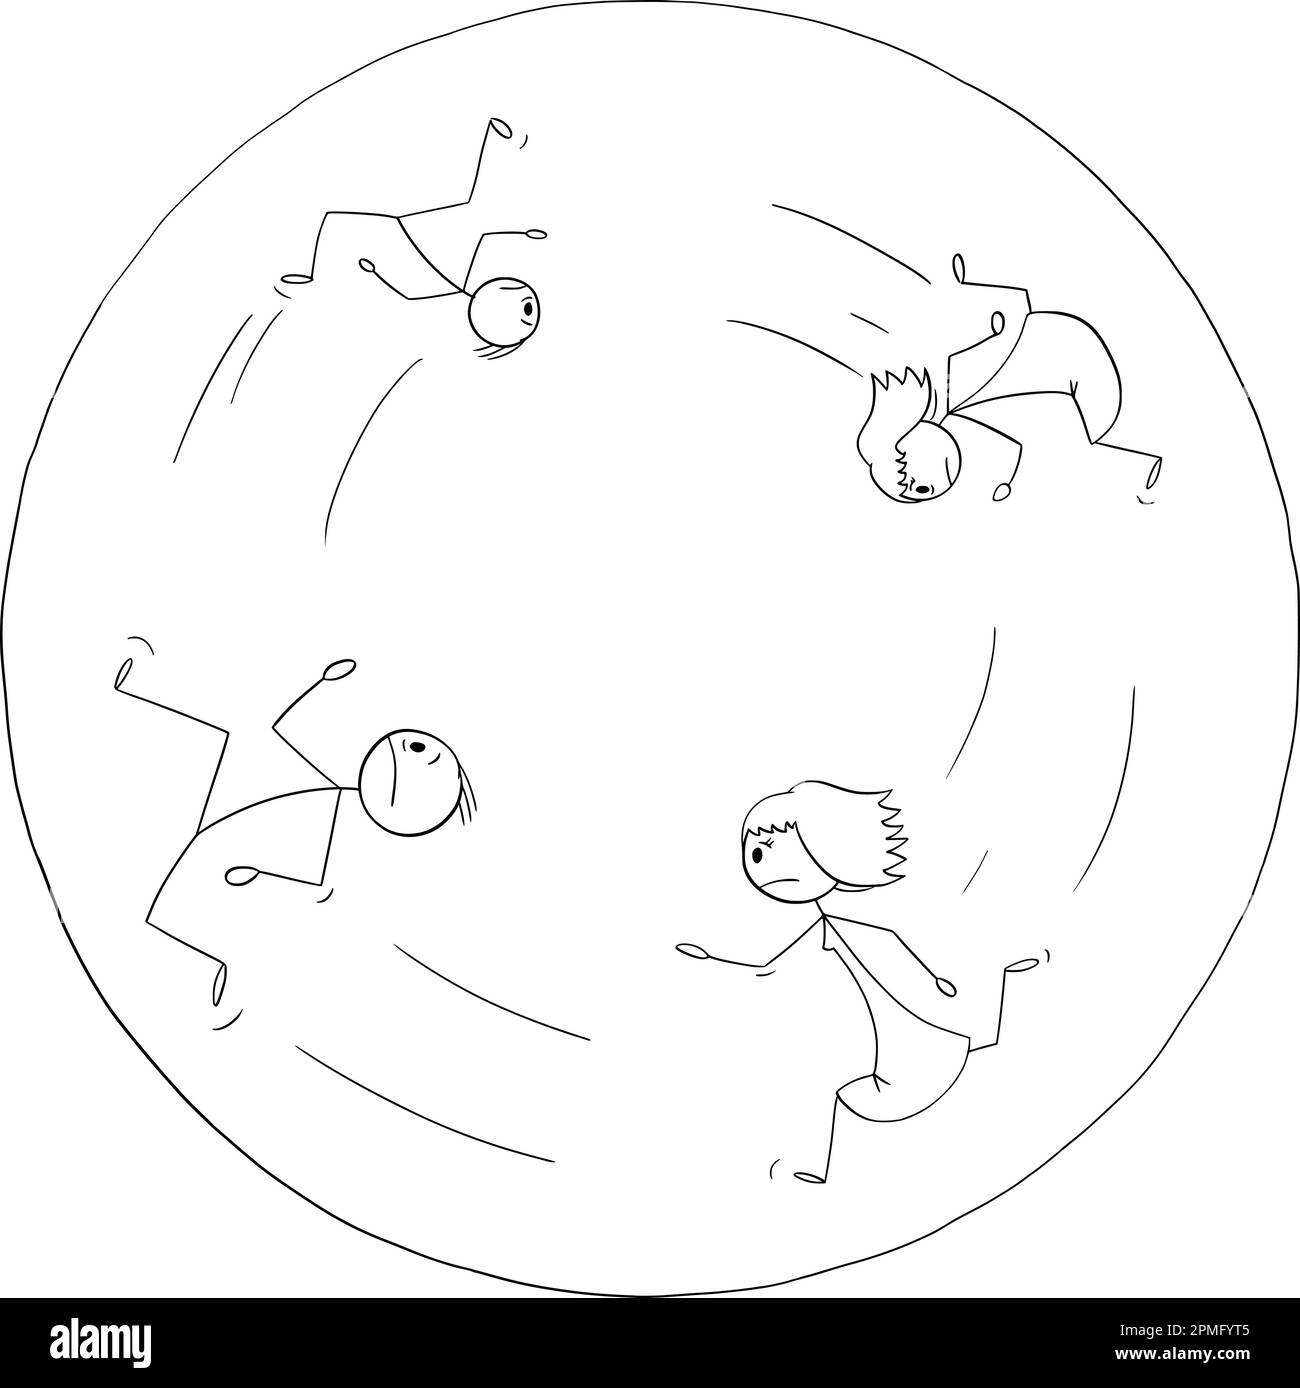 Troubled family with problem running forever in circle, vector cartoon stick figure or character illustration. Stock Vector